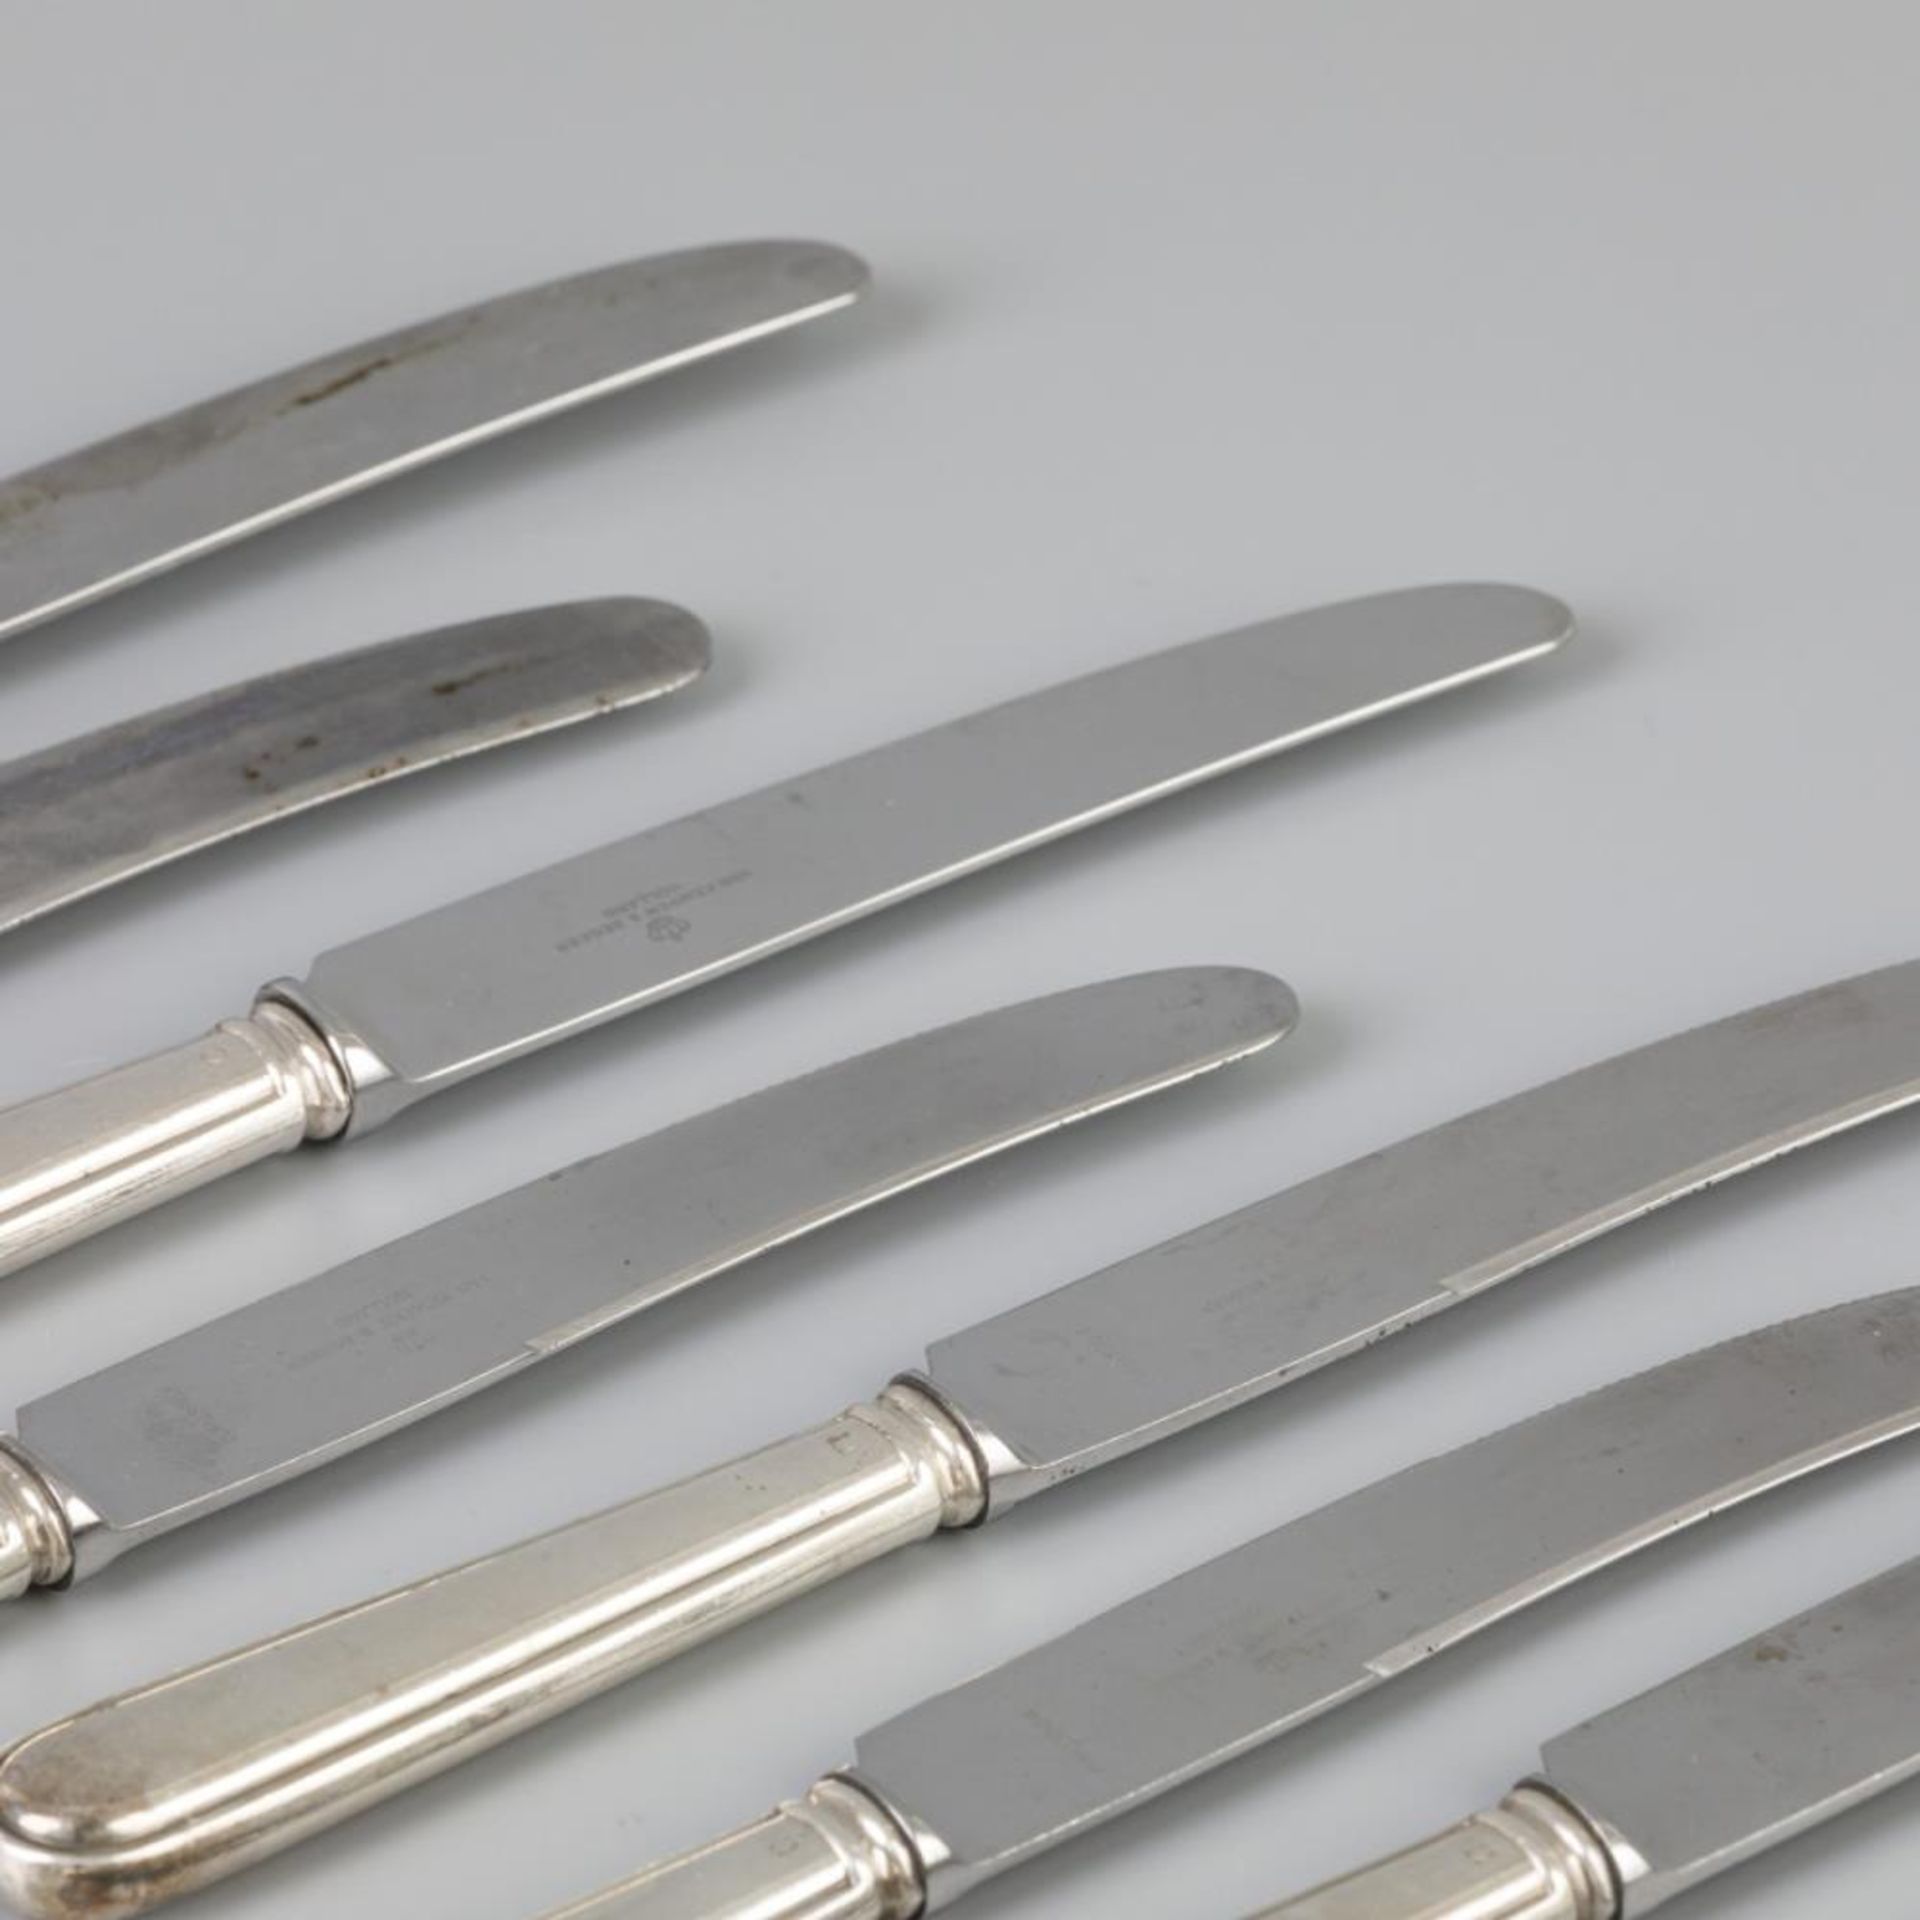 8 piece set of knives silver. - Image 2 of 5